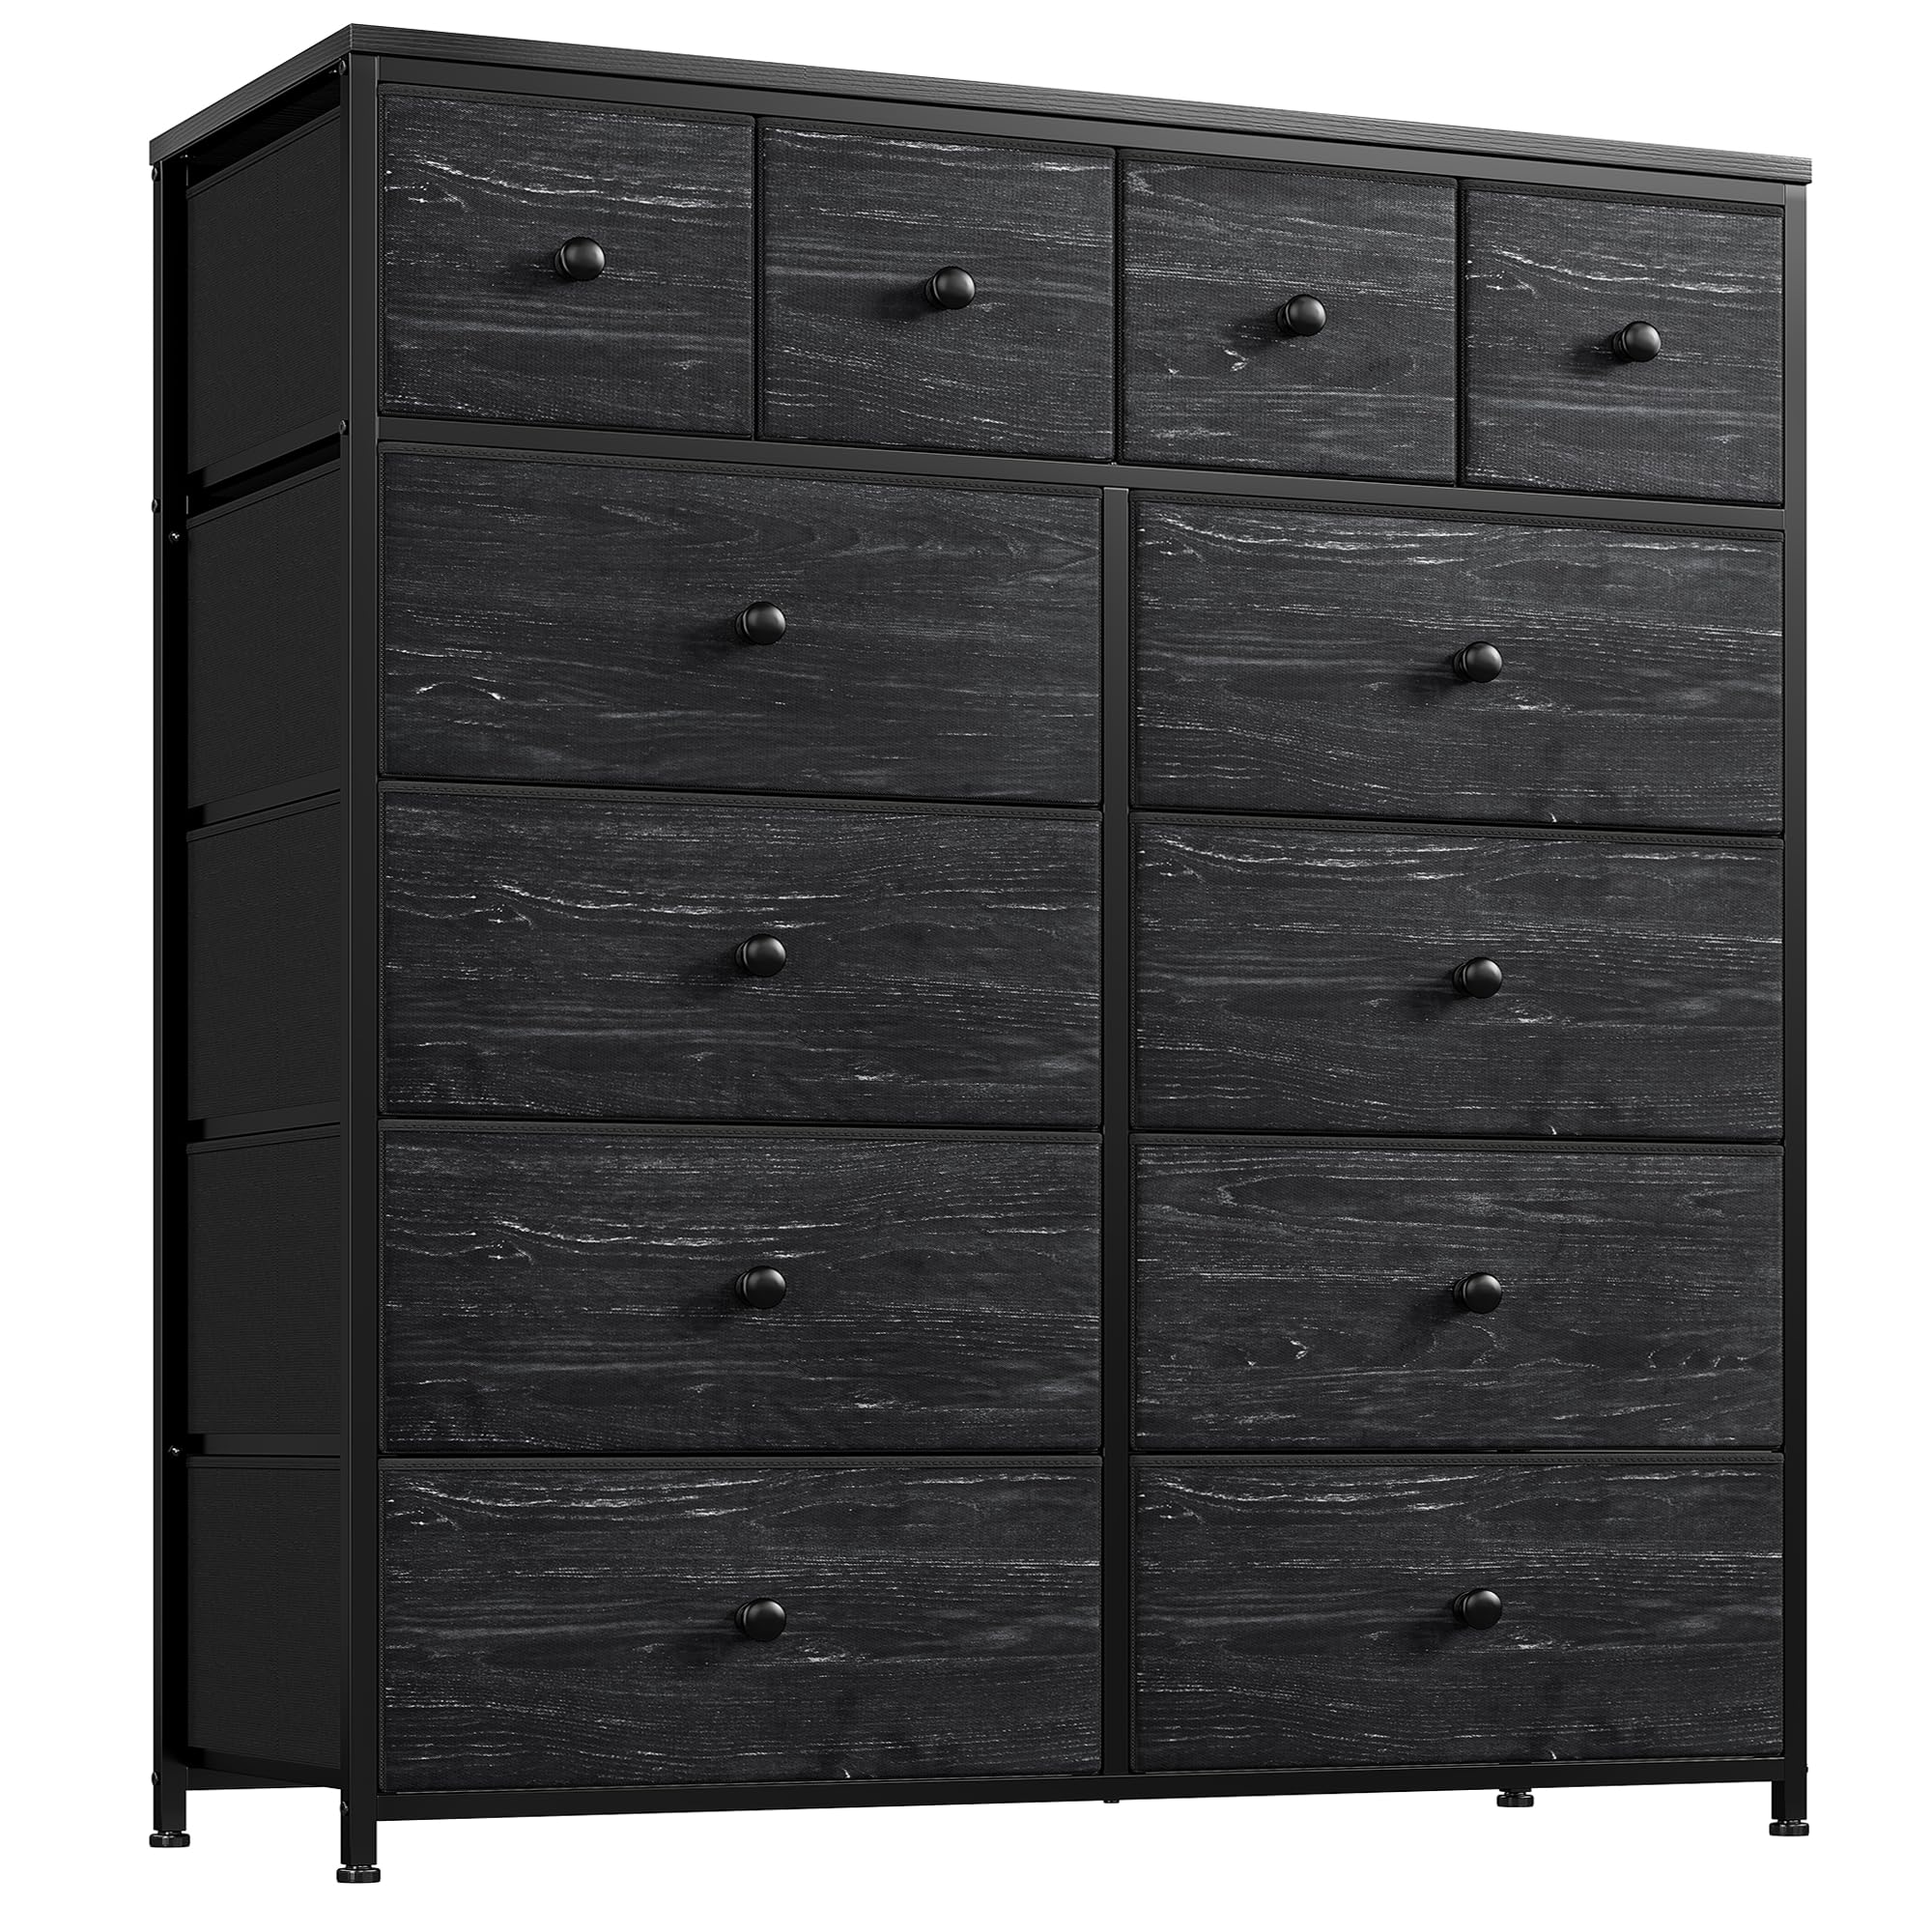 EnHomee Black Dresser for Bedroom with 12 Drawers, Bedroom Dresser with Wooden Top and Metal Frame, Tall Dressers & Chests of Drawers for Bedroom, Closet, 40.6